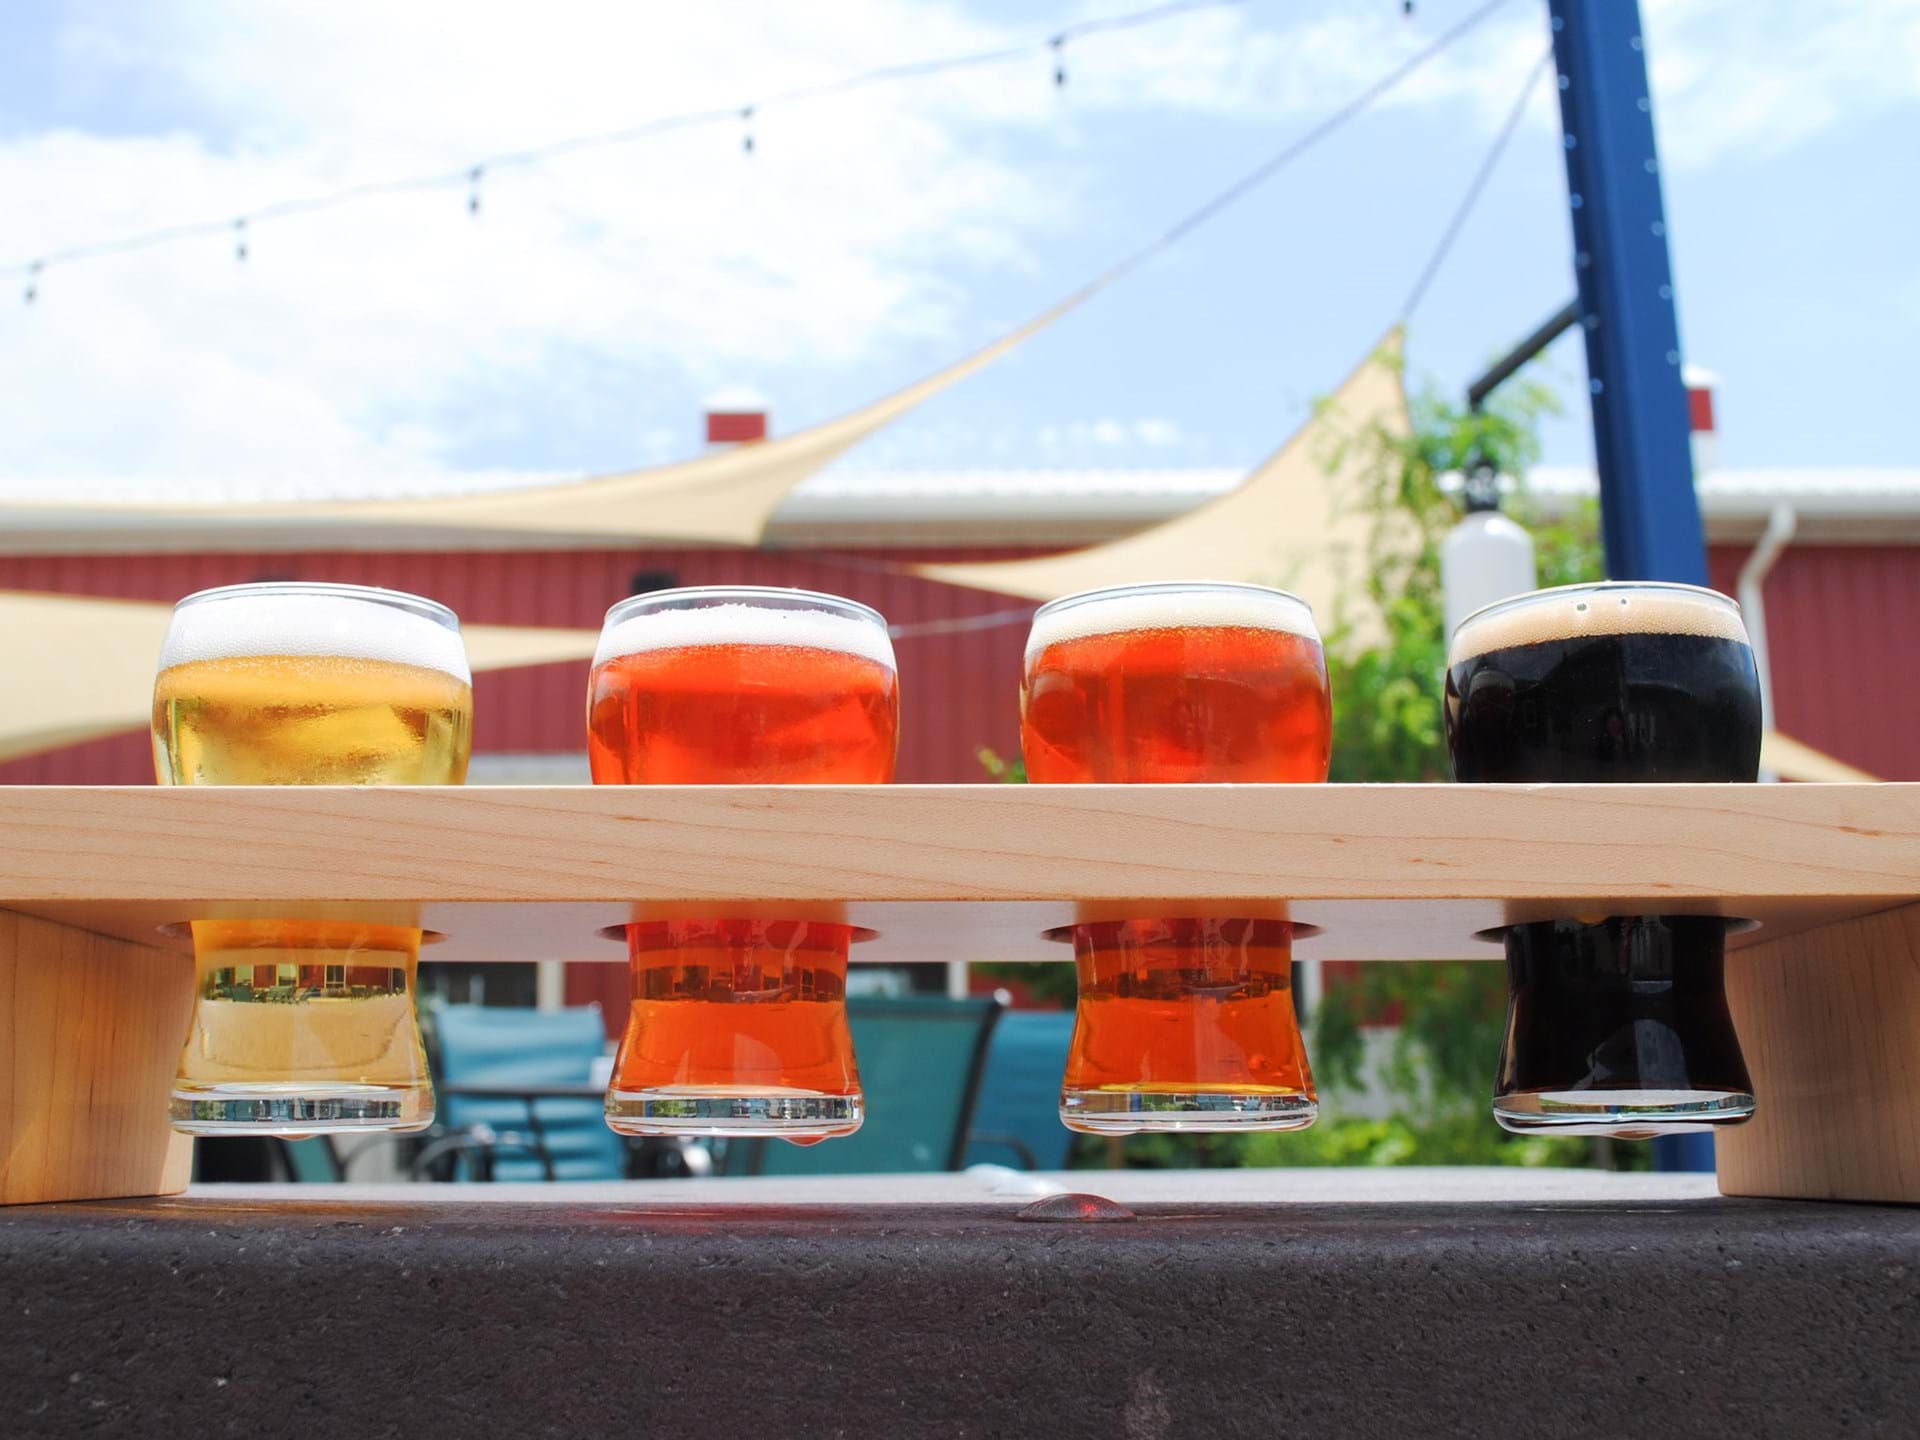 Flights are a great way to sample the huge variety. Have one after your bike ride!